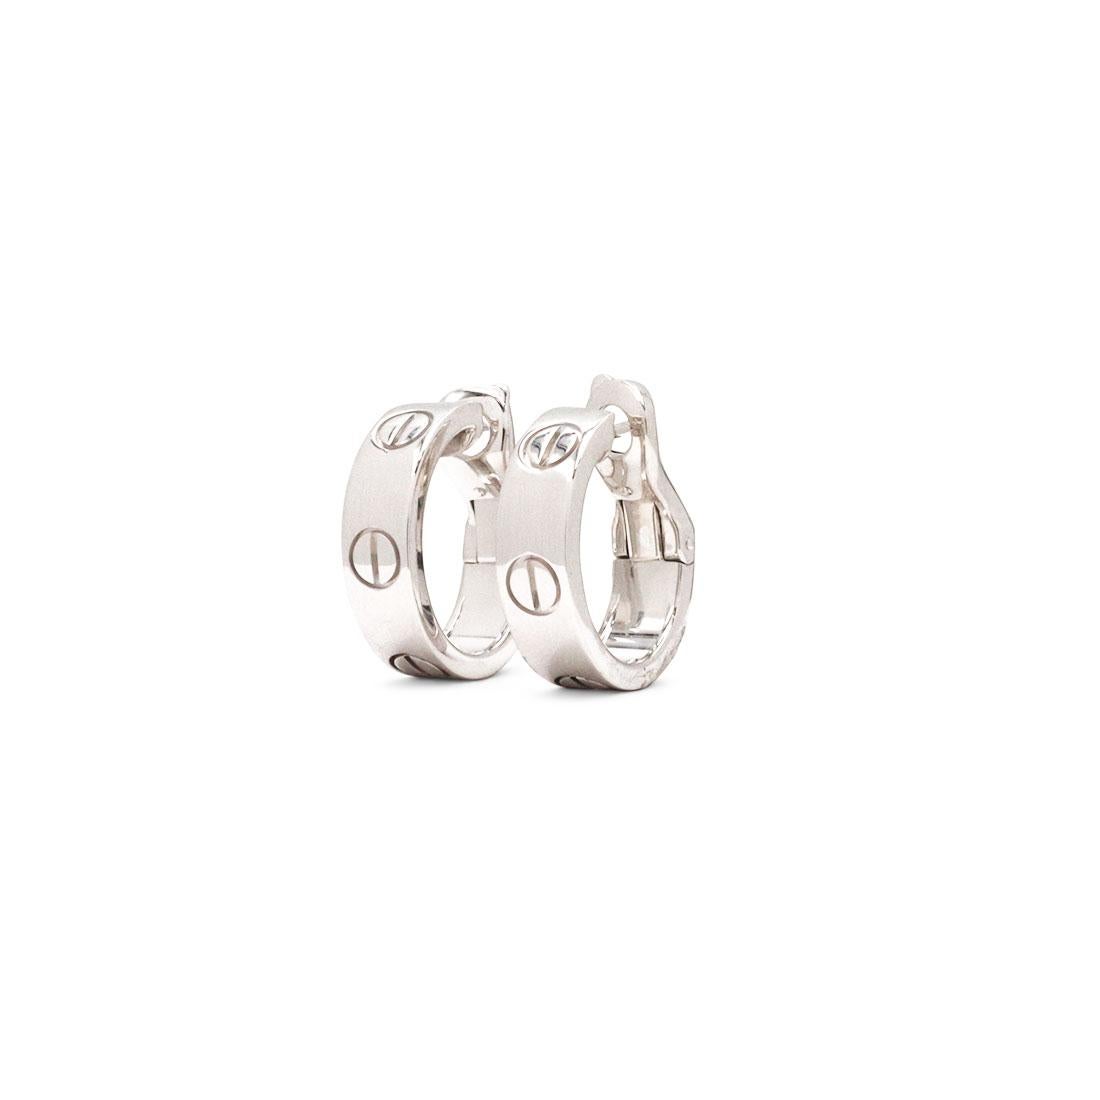 Authentic Cartier 'Love' earrings crafted in 18 karat white gold. Signed Cartier, 750, with serial number and hallmark. The earrings are presented with the original papers not with the box. CIRCA 2010s.

Brand: Cartier
Collection: Love
Metal: 18K